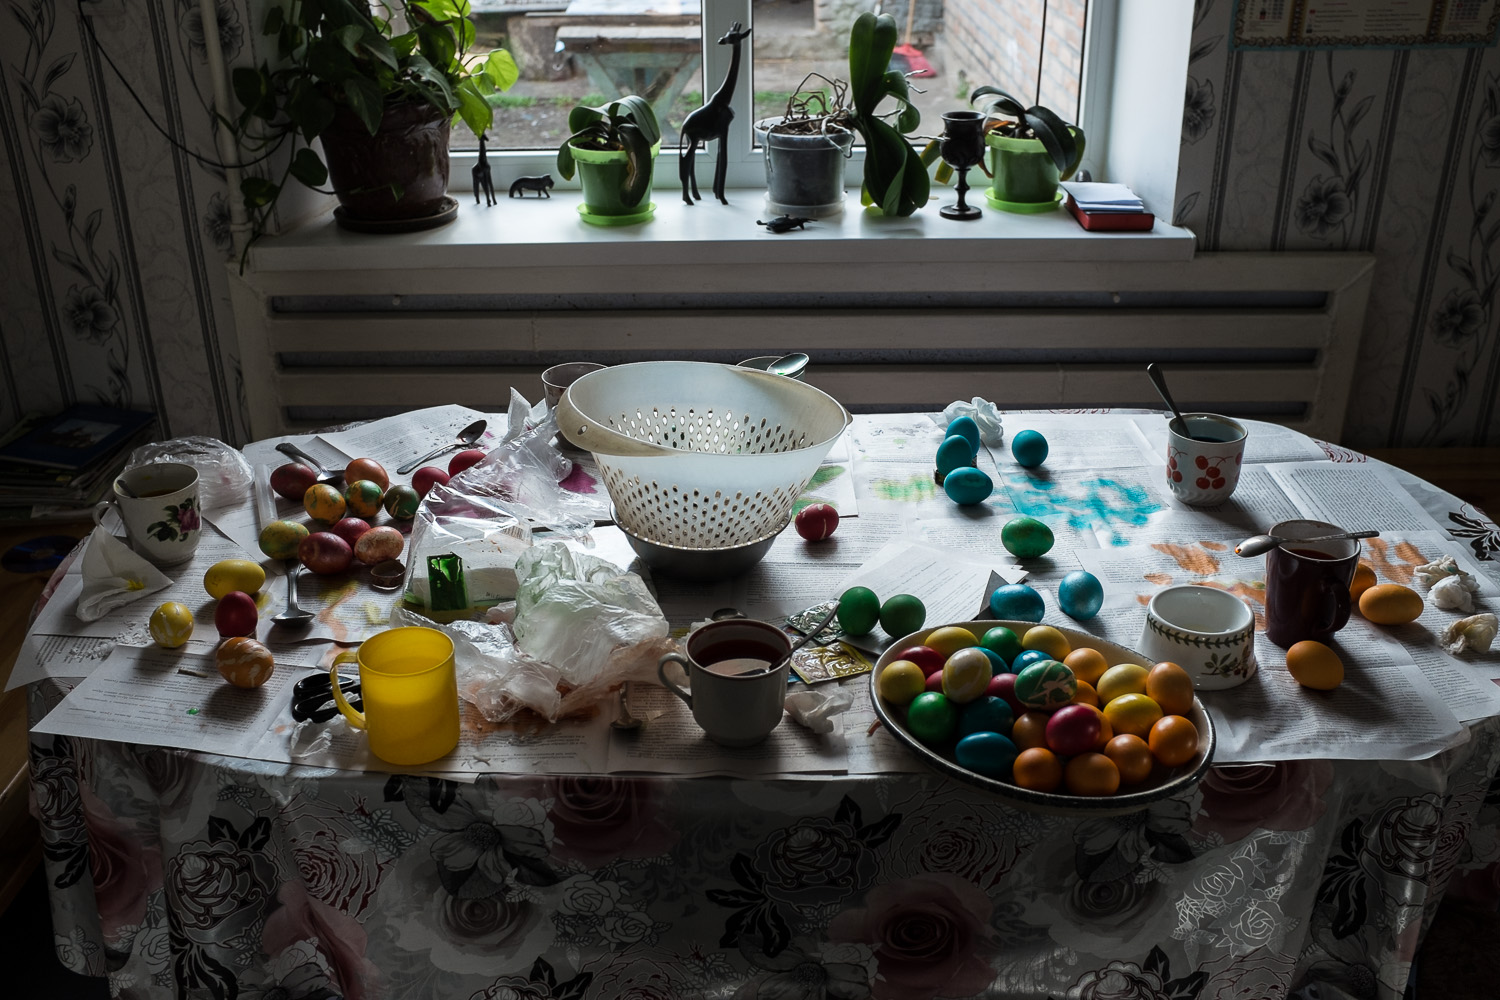  Painted eggs on a table in the village of Stara Nekrasivka in Ukraine’s Odessa region. Painting eggs is an Easter tradition in Ukraine, Russia and many other countries with Eastern Orthodox populations. 